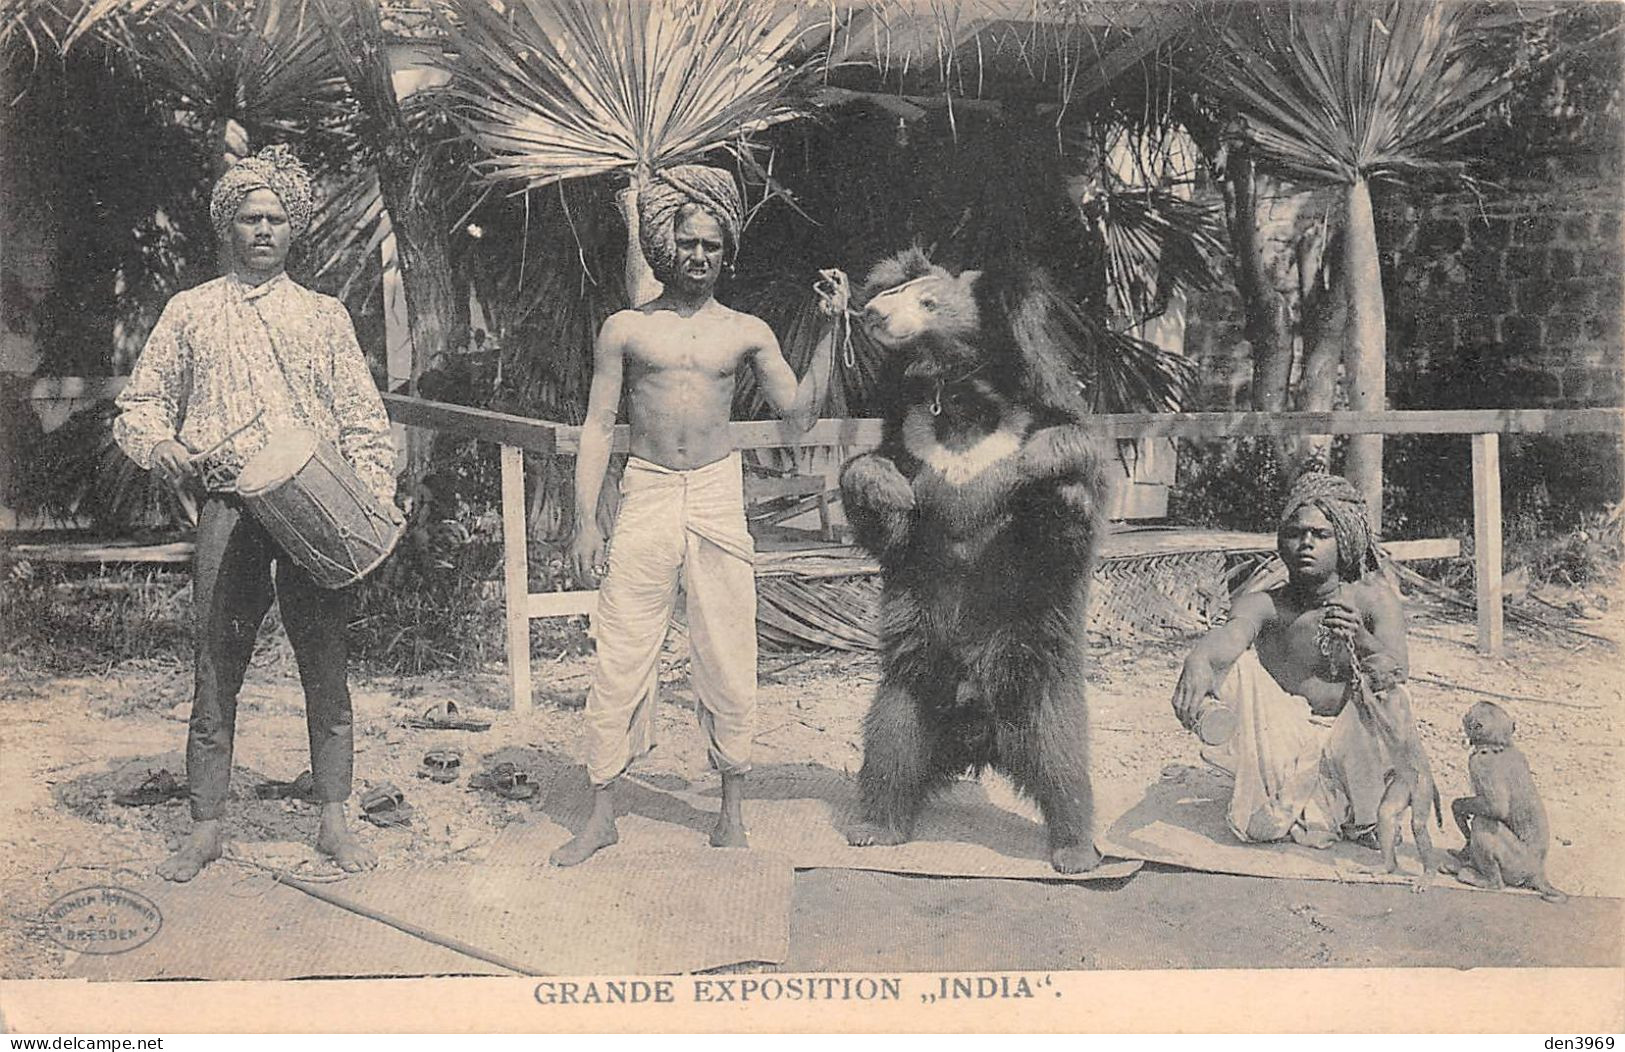 Inde - Grande Exposition INDIA - Montreur D'Ours, Tambourinaire - India